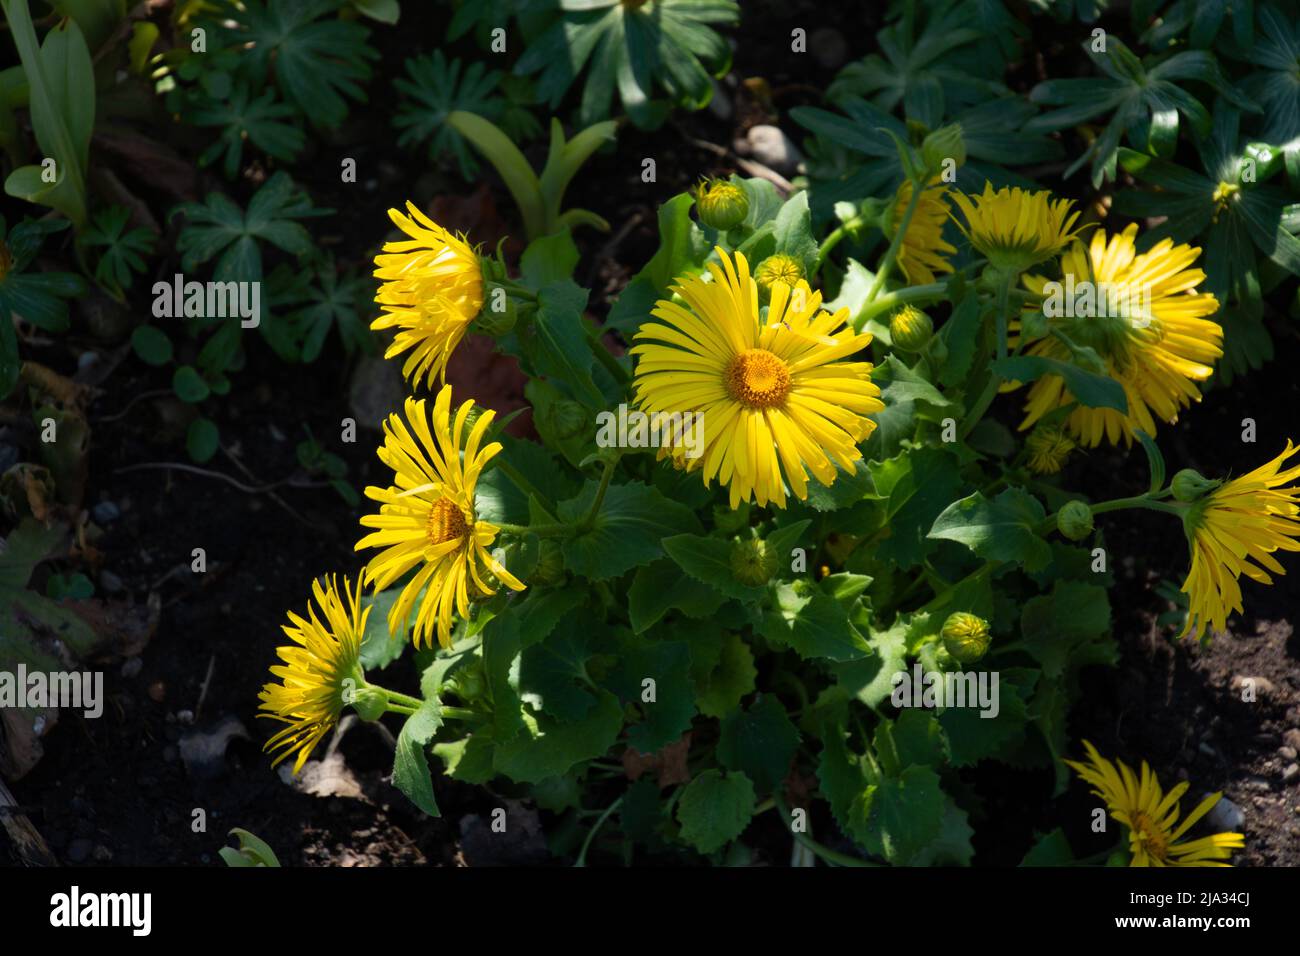 doronicum orientale plant in the flowerbed with daisy-like yellow flowerheads Stock Photo